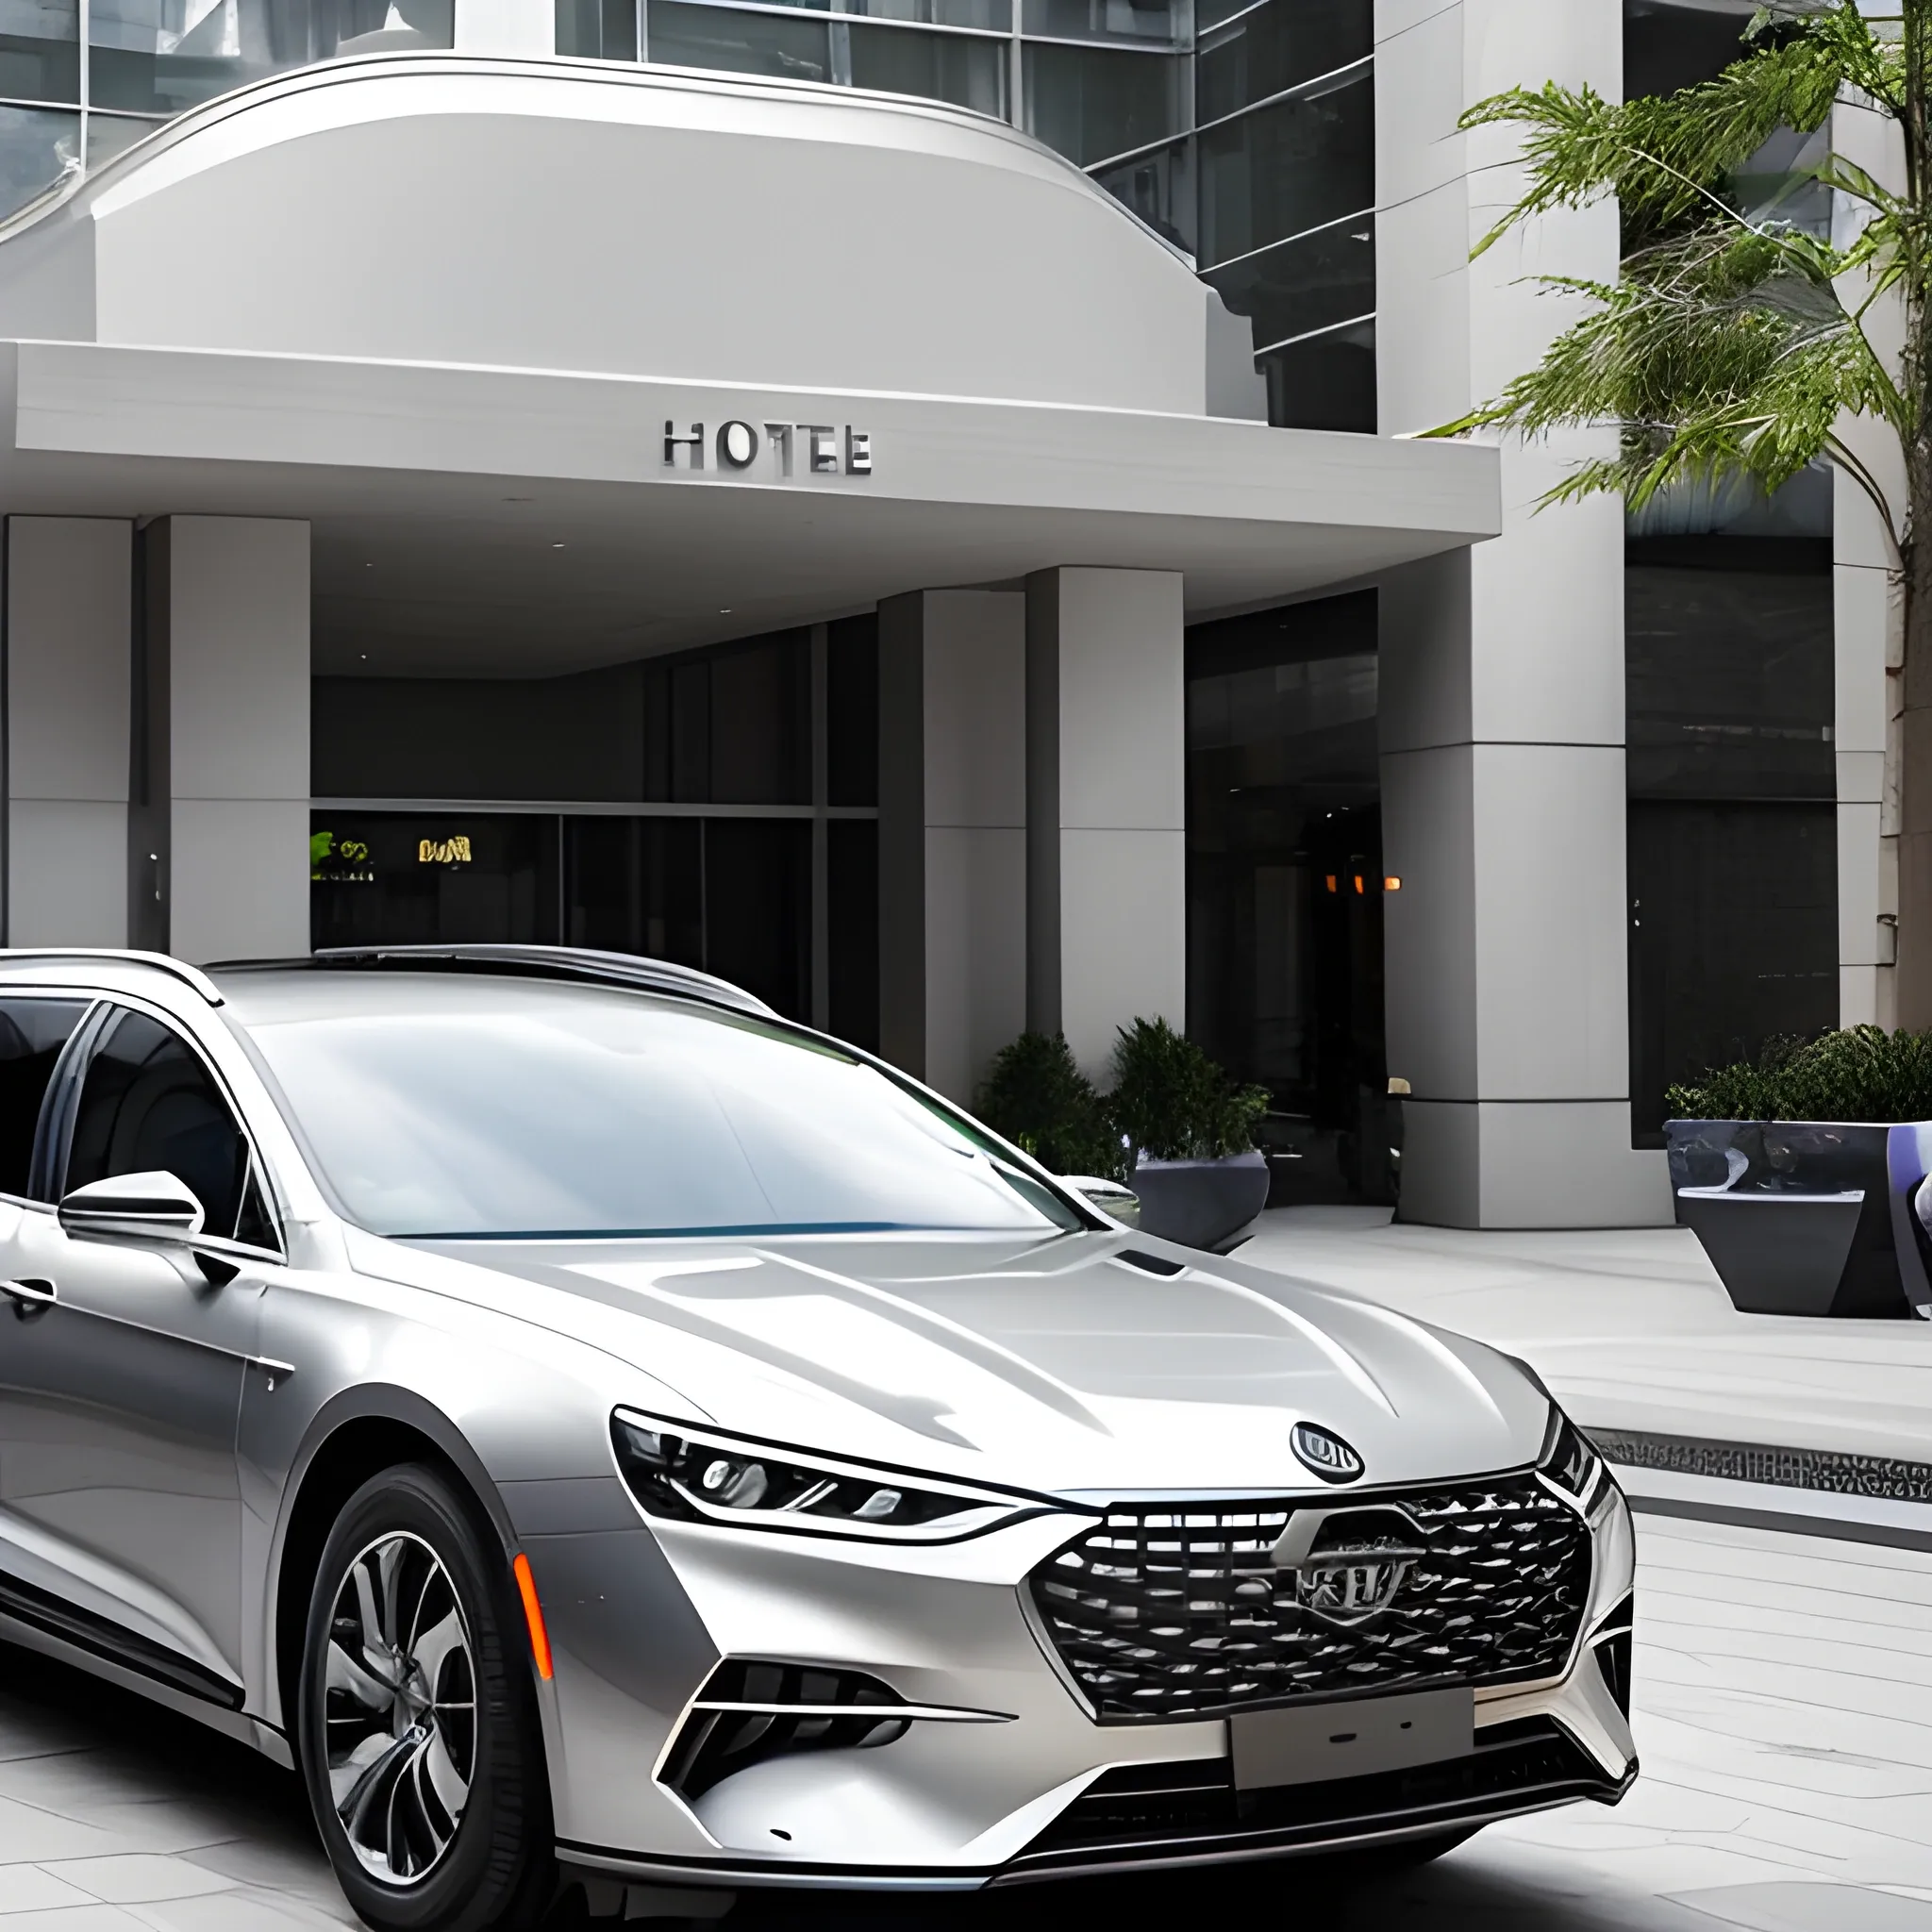 From a distance，A silver, sleek Anstation wagon was parked at the entrance of the 5-star hotel，Style like photography，Modern situation



